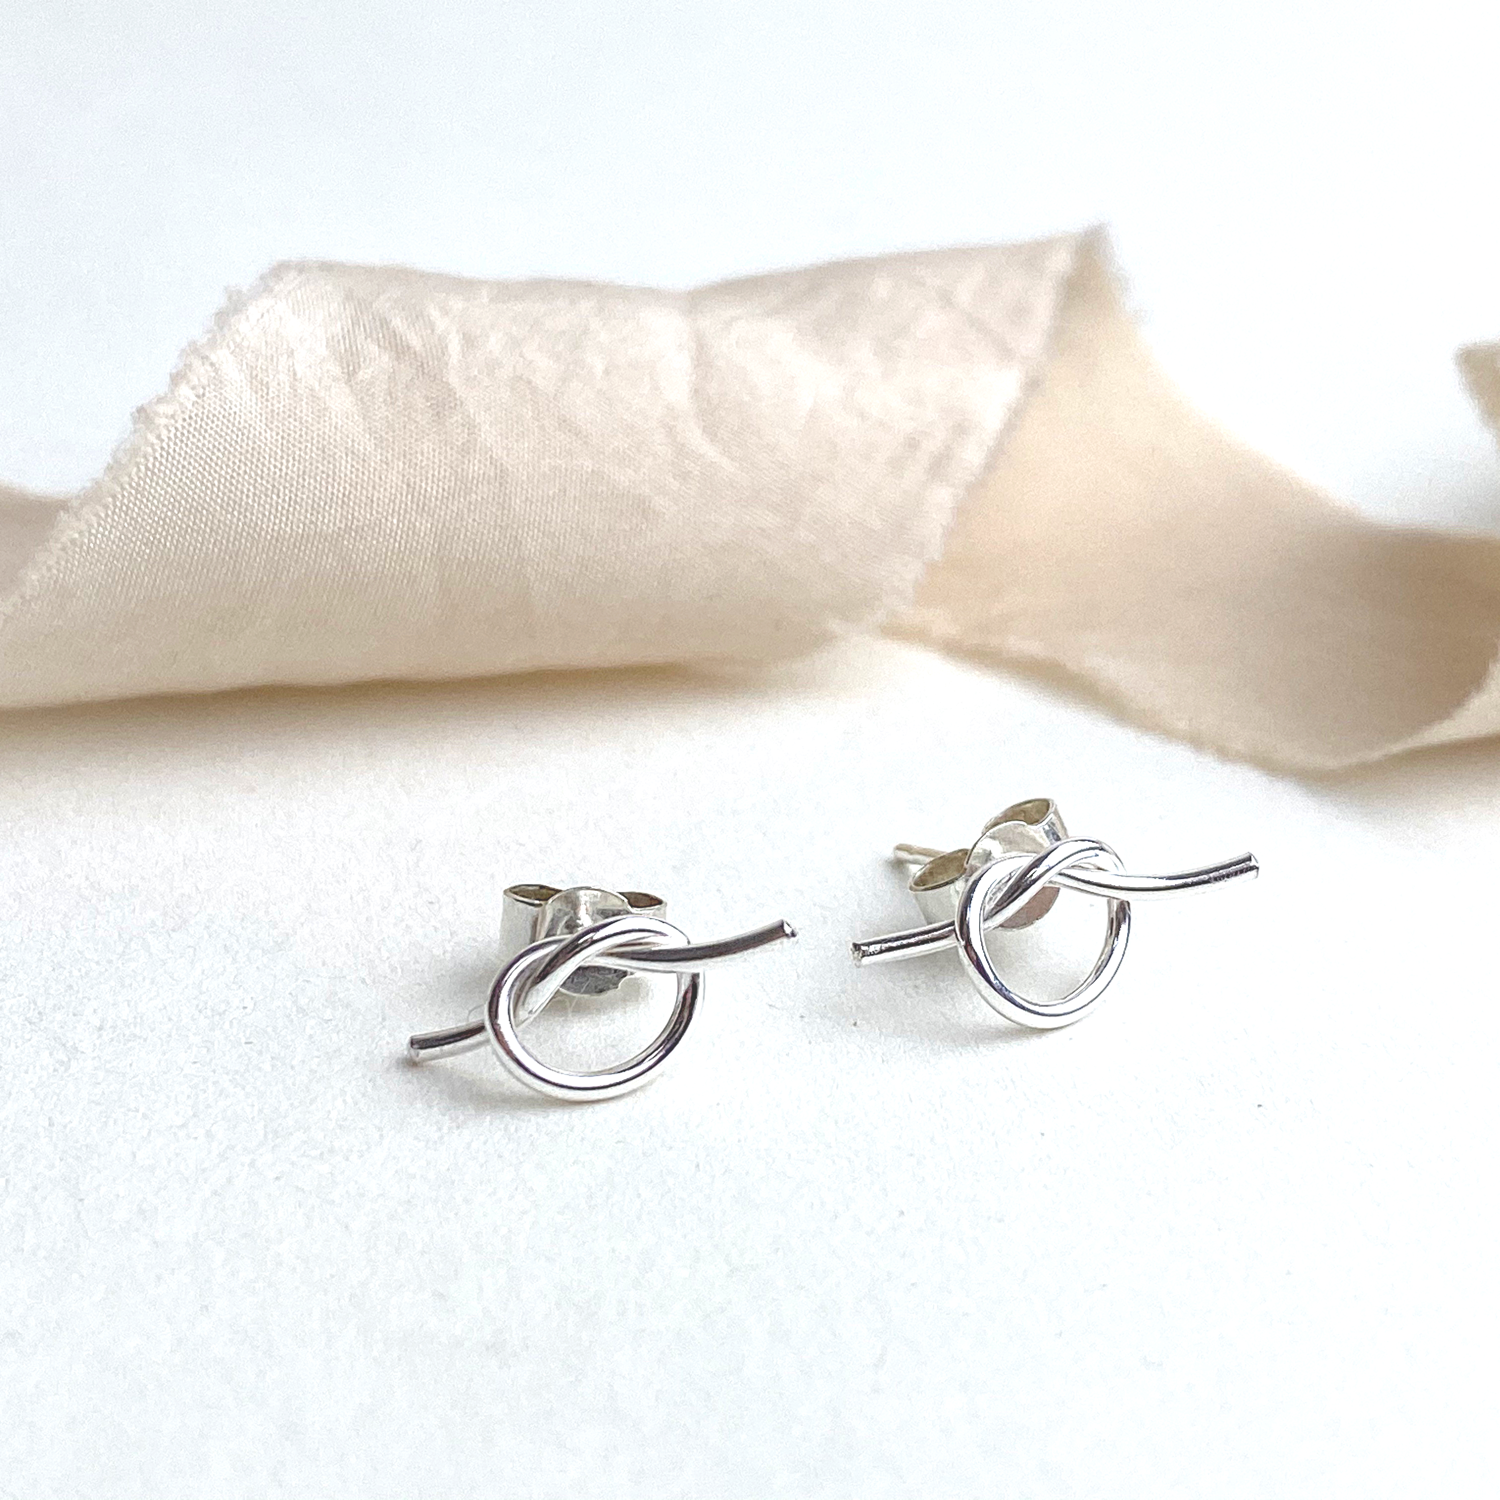 The Meg Knot Earrings - sterling silver studs - wedding and bridesmaid gifts - hand tied knot earrings